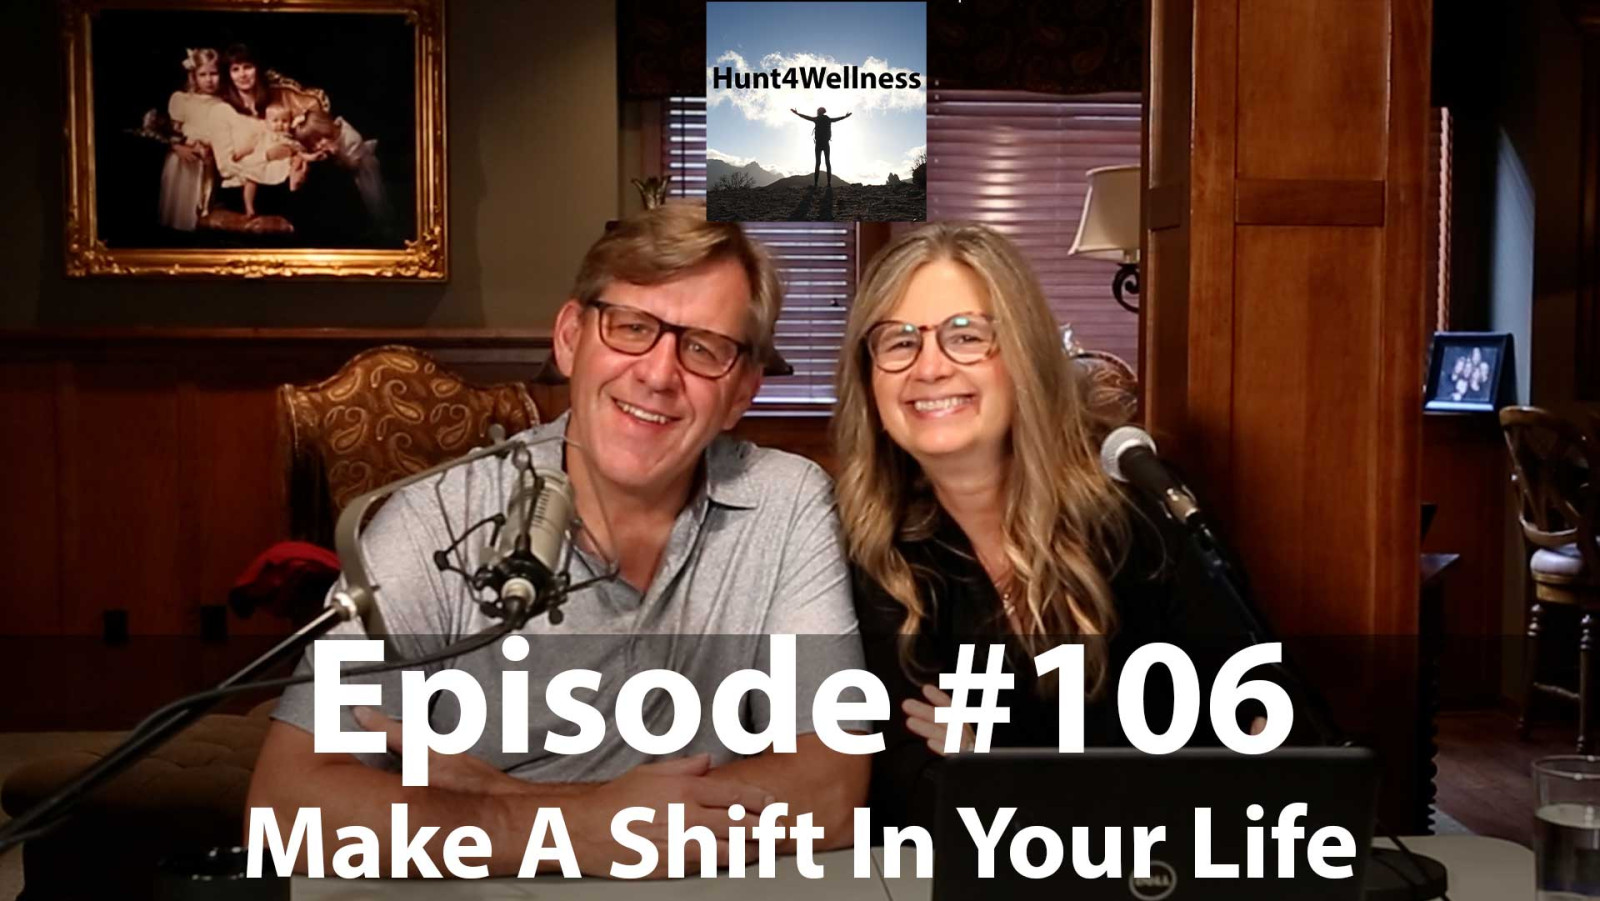 Episode #106 - Make A Shift In Your Life